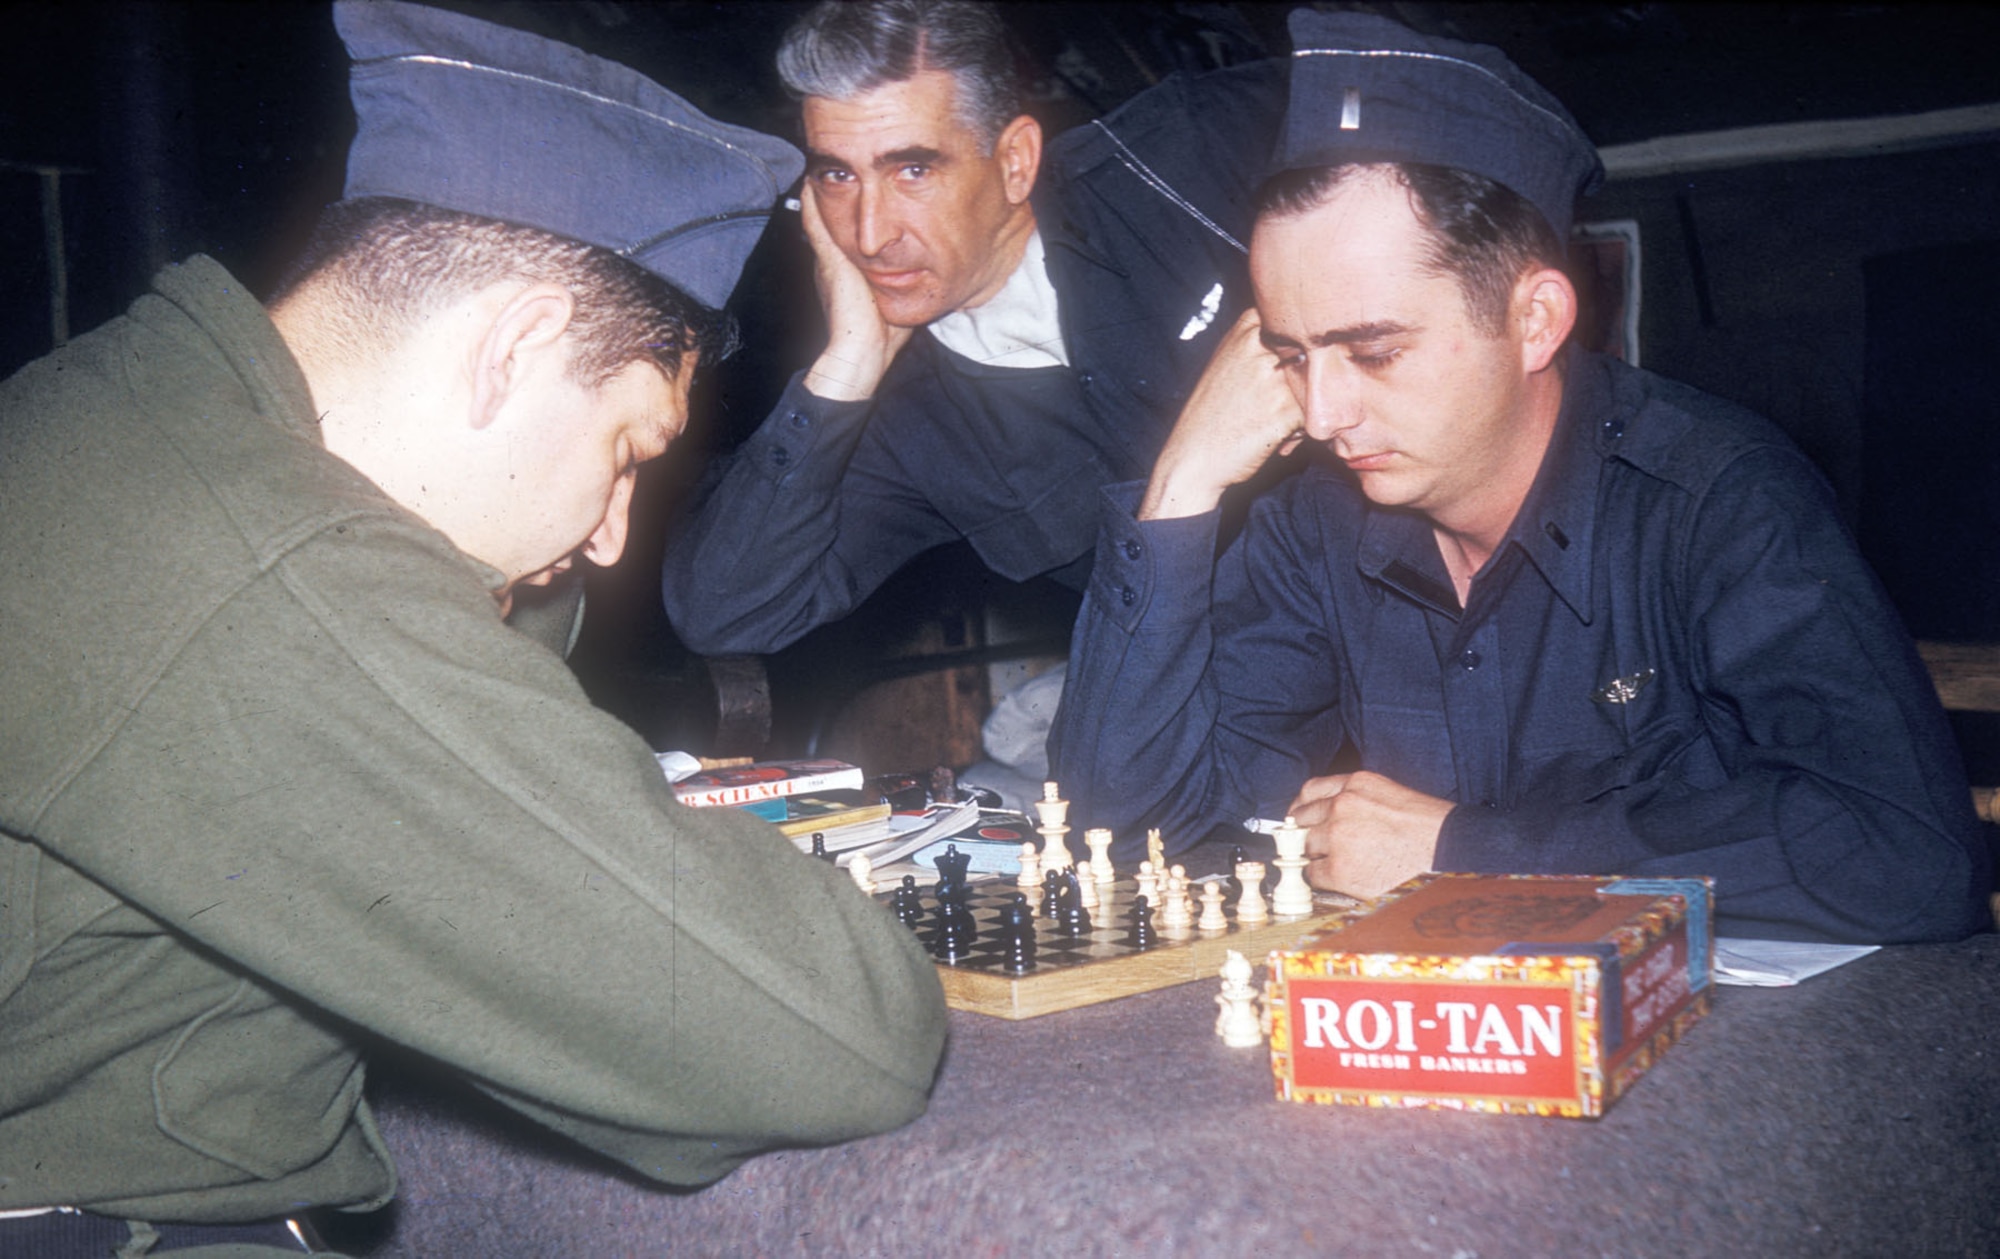 Capt. Evens and 1st Lt. Baldwin pass the time immersed in a chess game while Capt. Diff watches. (U.S. Air Force photo)